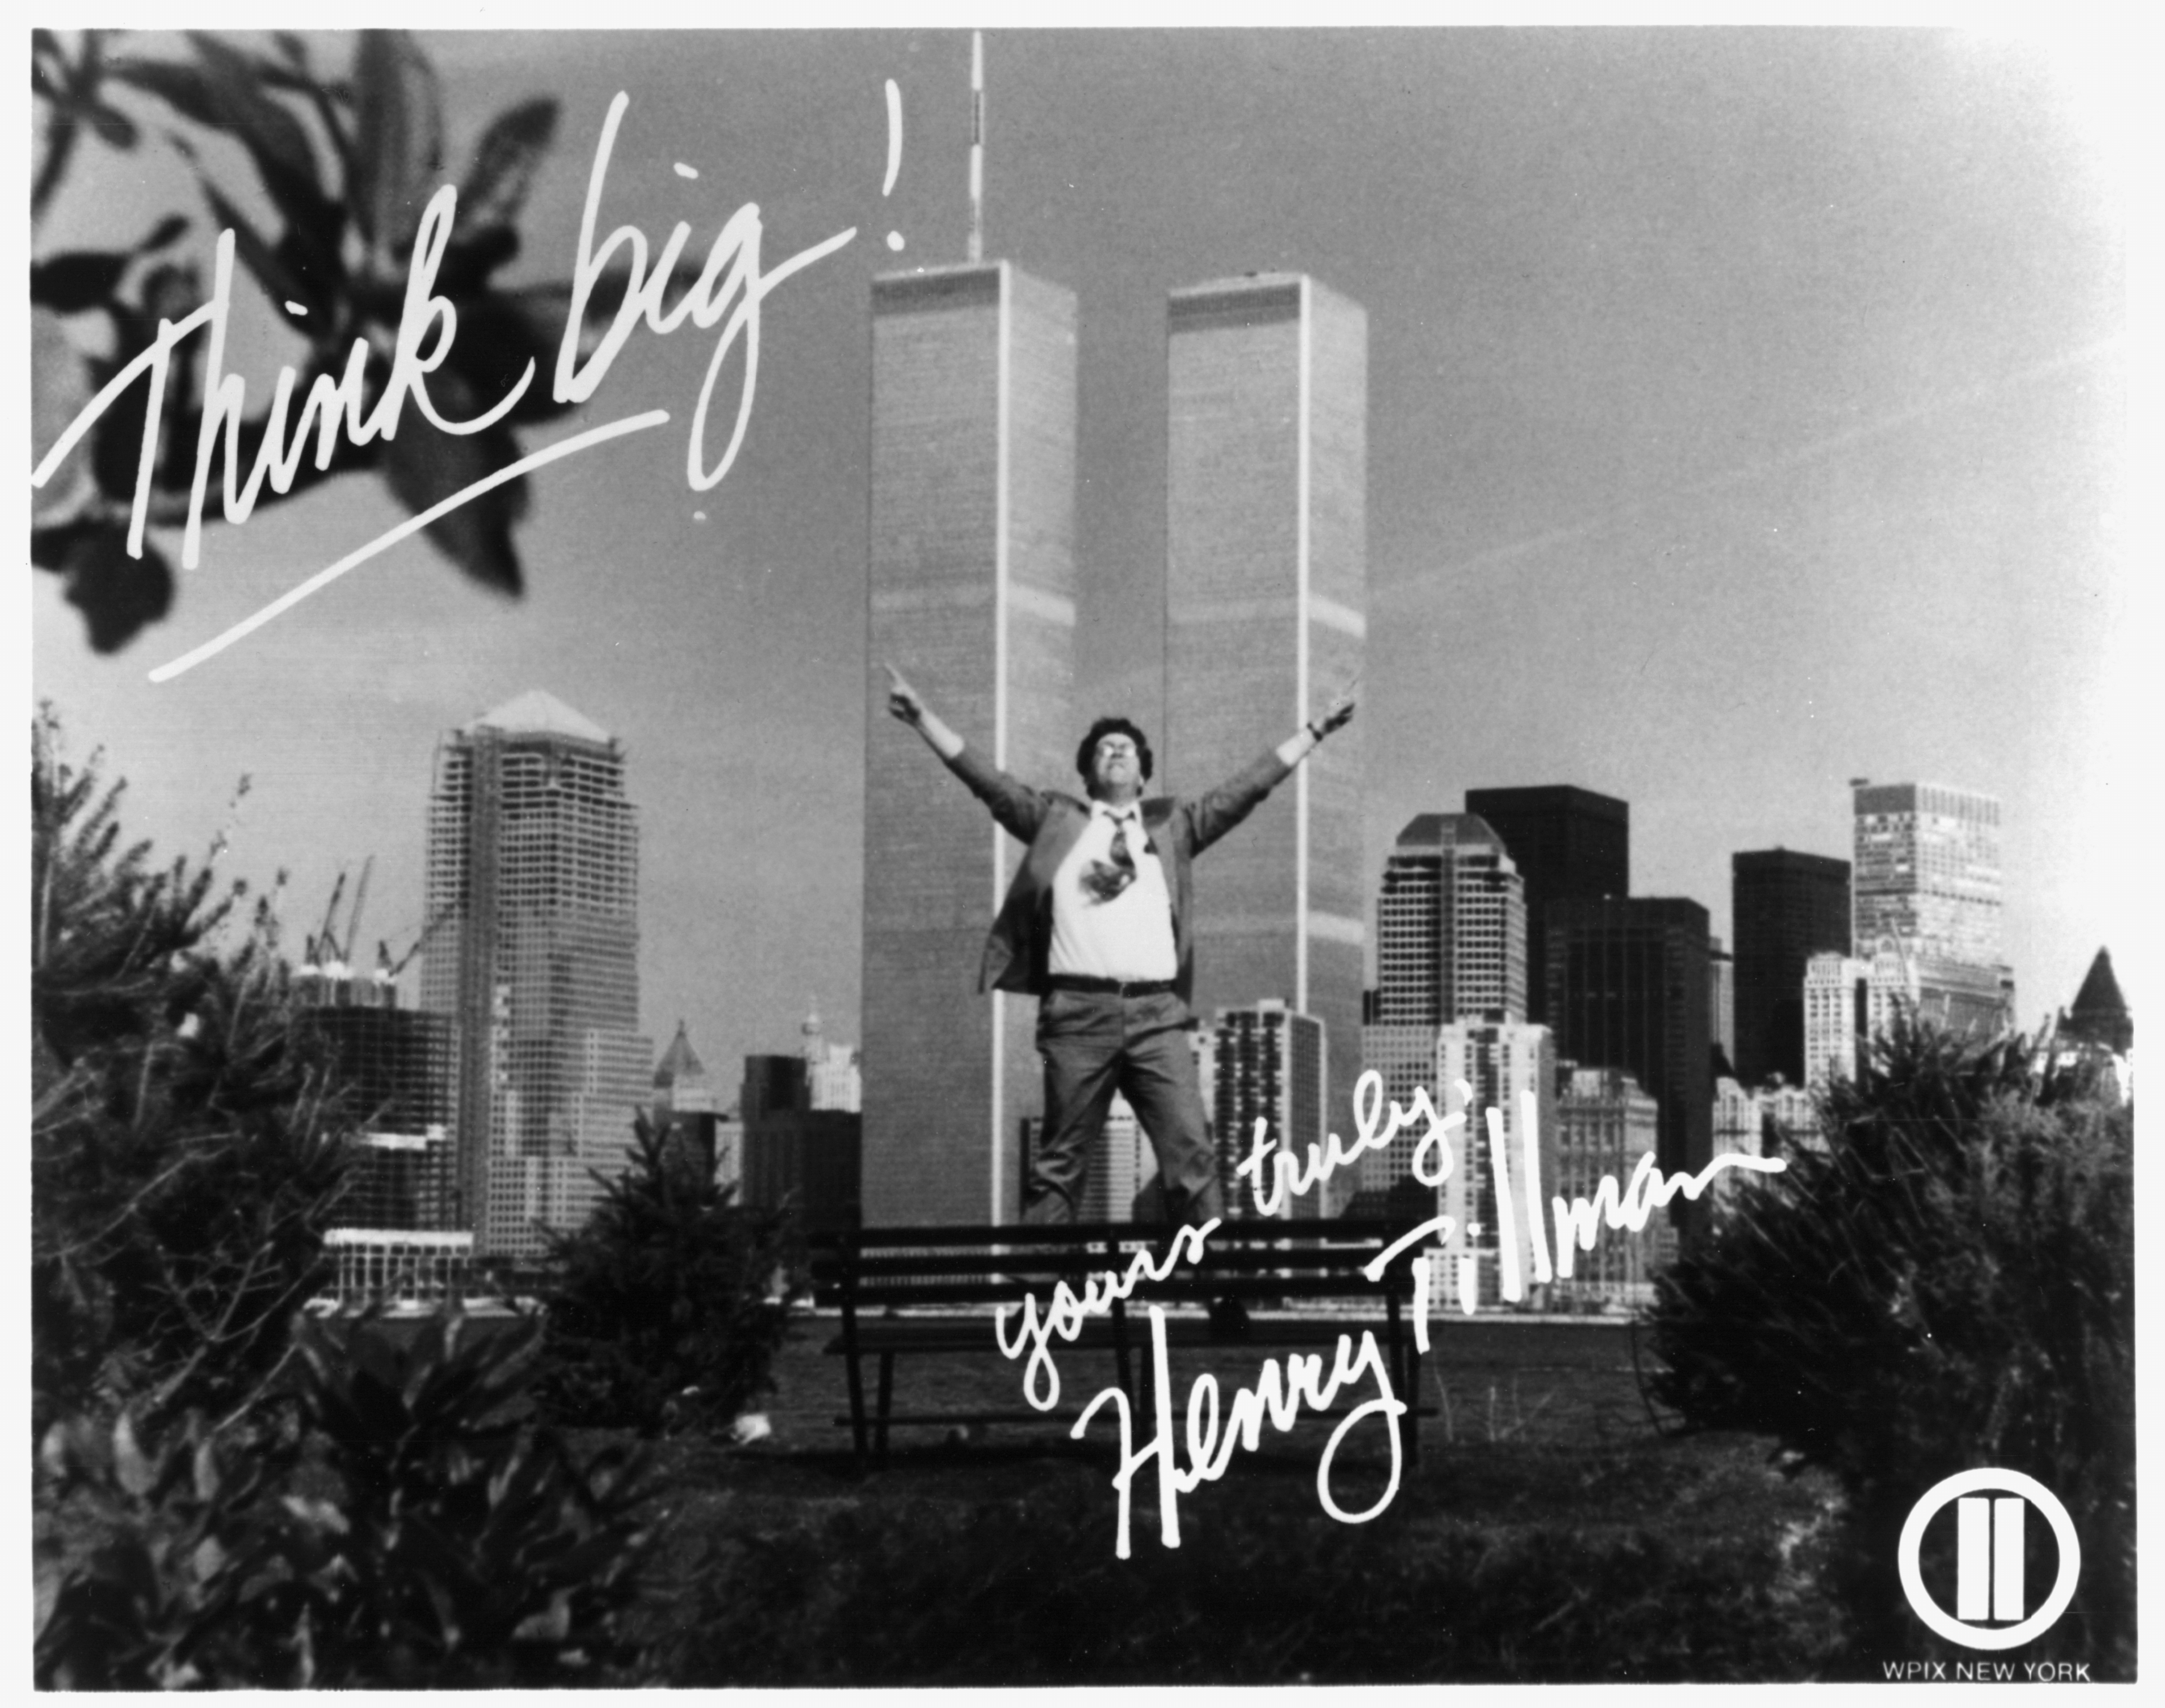 Christopher Chisholm as Henry Tillman looking for the Big Idea in front of the Twin Towers of NYC